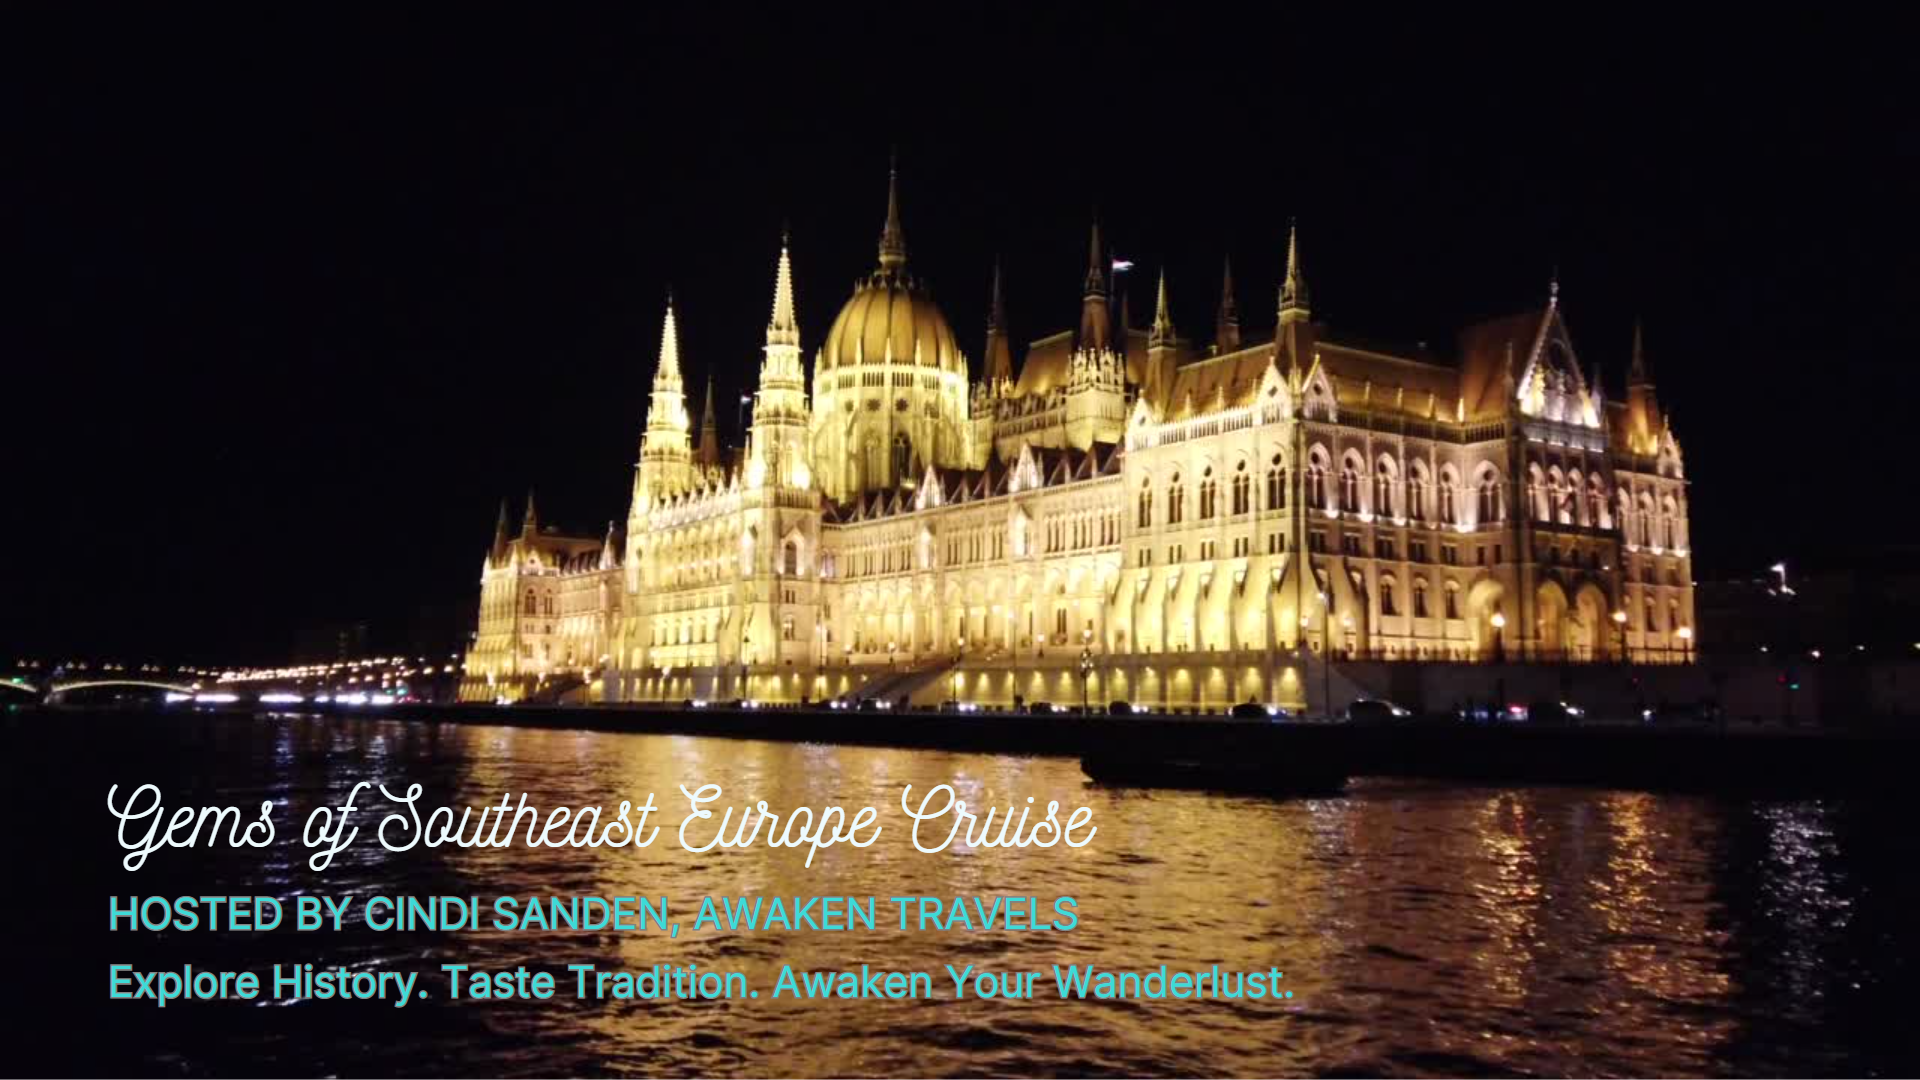 Update: The Majestic Danube River Cruise - A Journey Through Southeast Europe